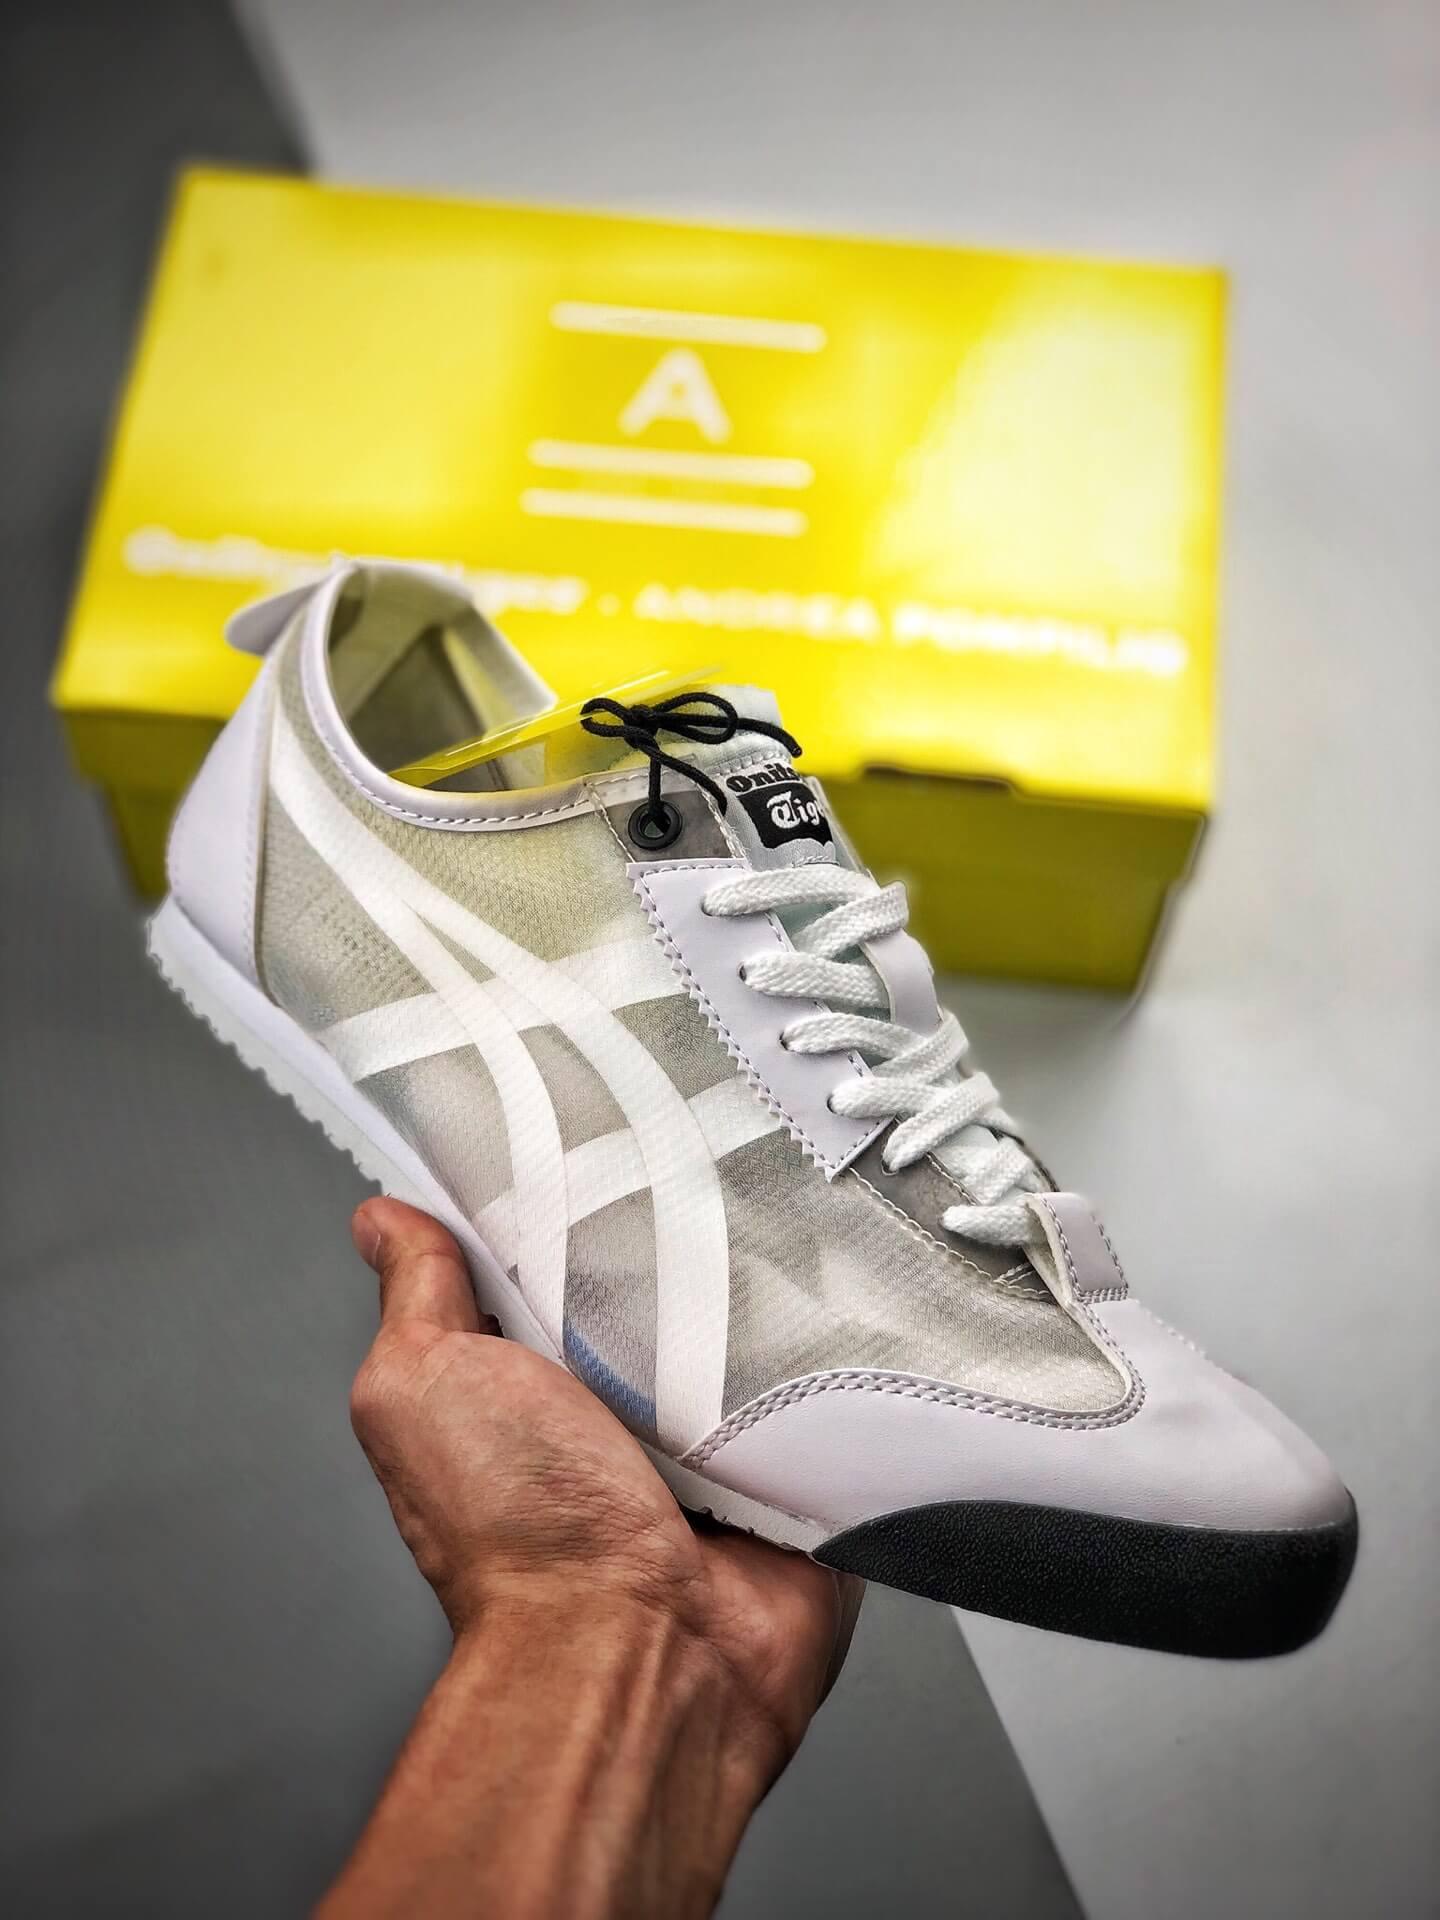 The Onitsuka Tiger x Andrea Pompilio 